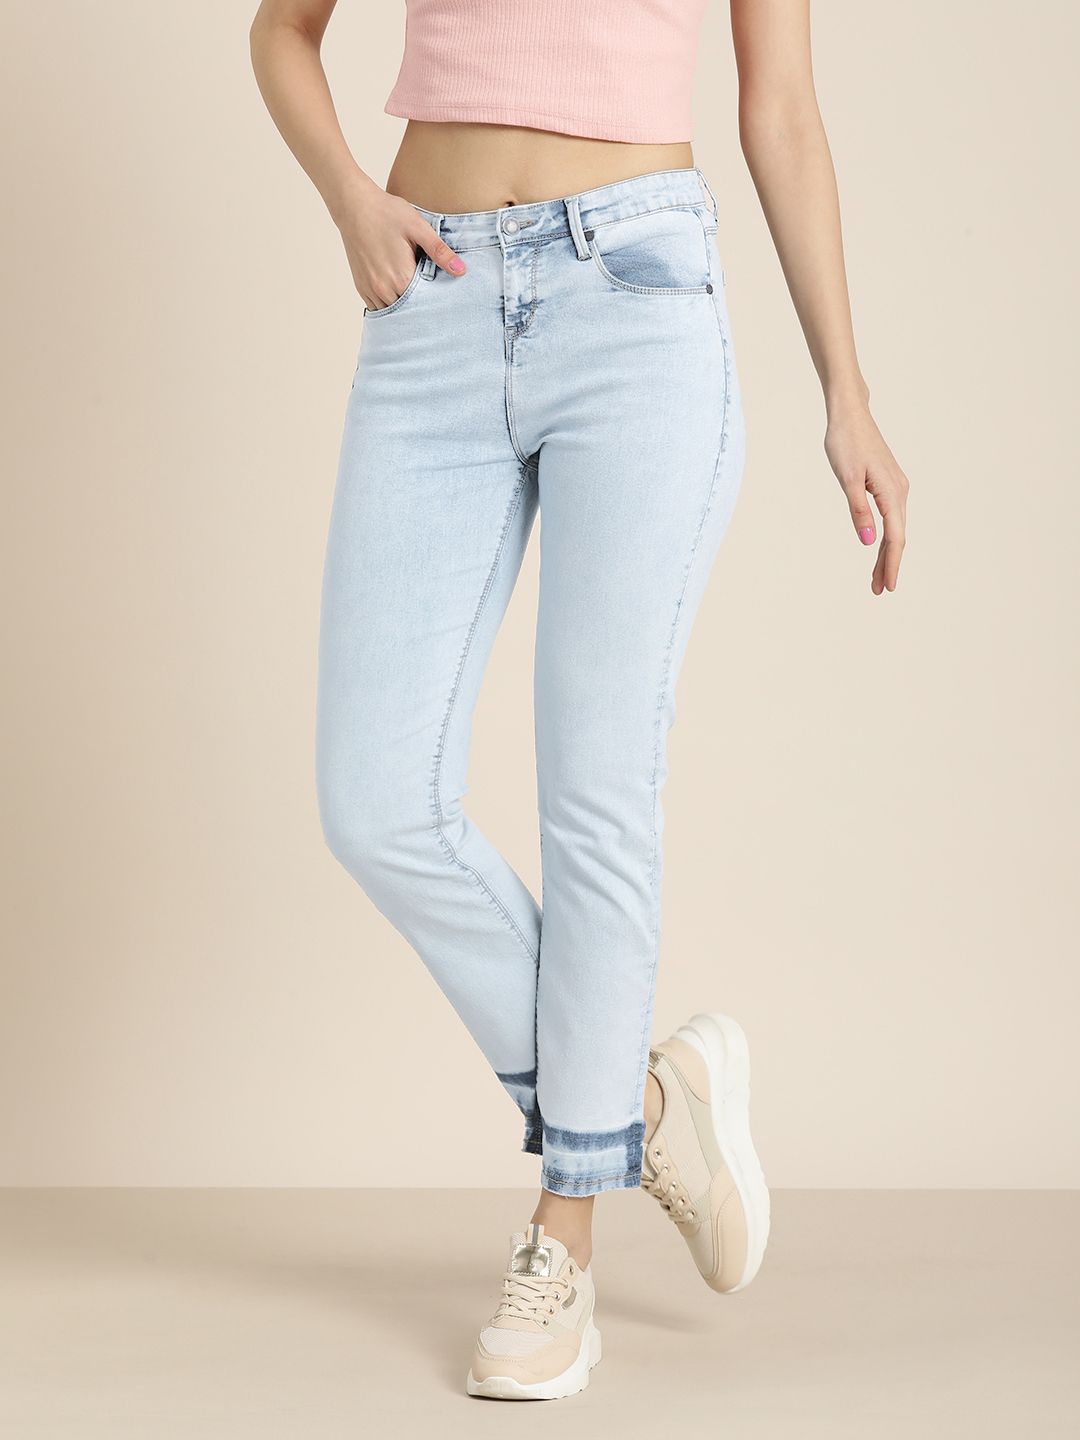 Moda Rapido Women Blue Faded Slim Fit Stretchable Casual Jeans Price in India